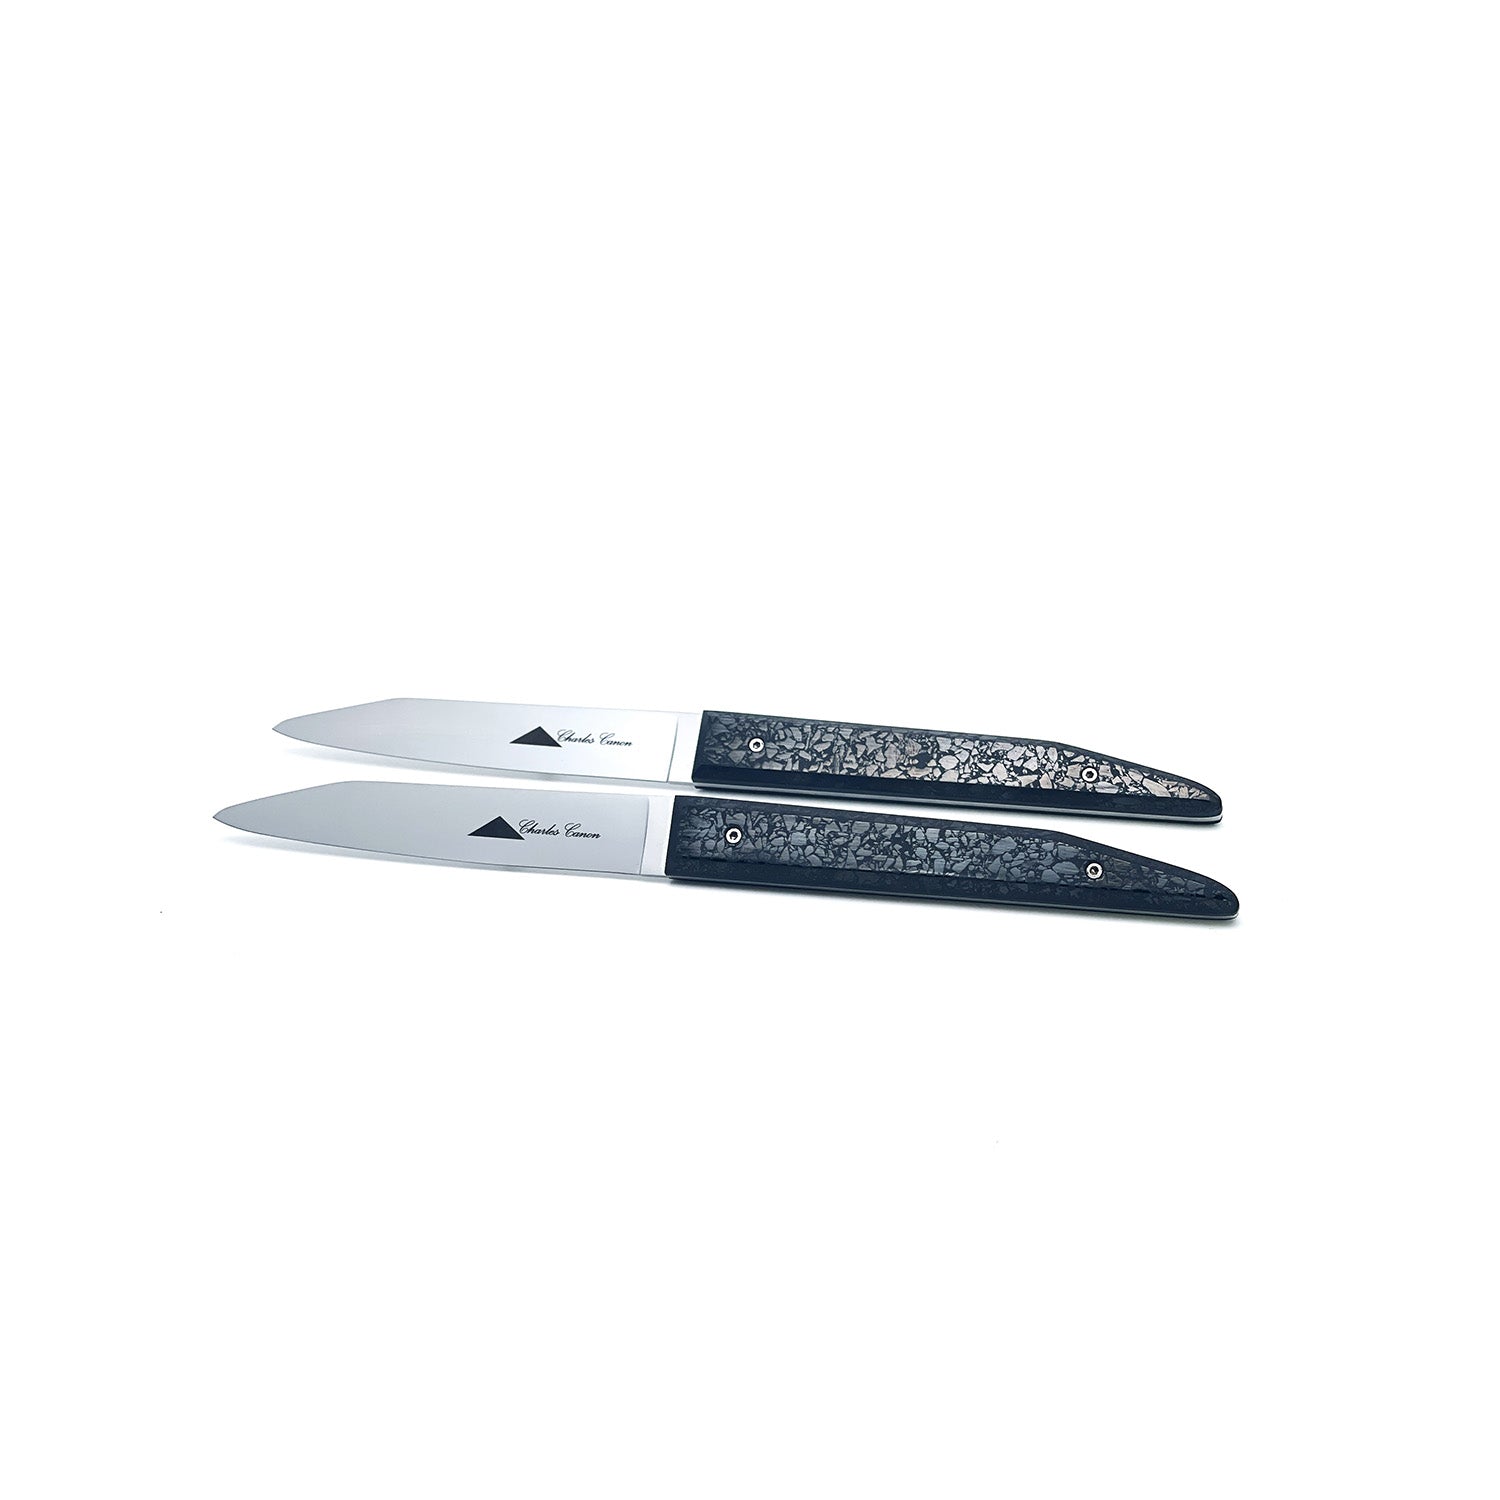 Duo box: 2 table knives with polished charcoal handles